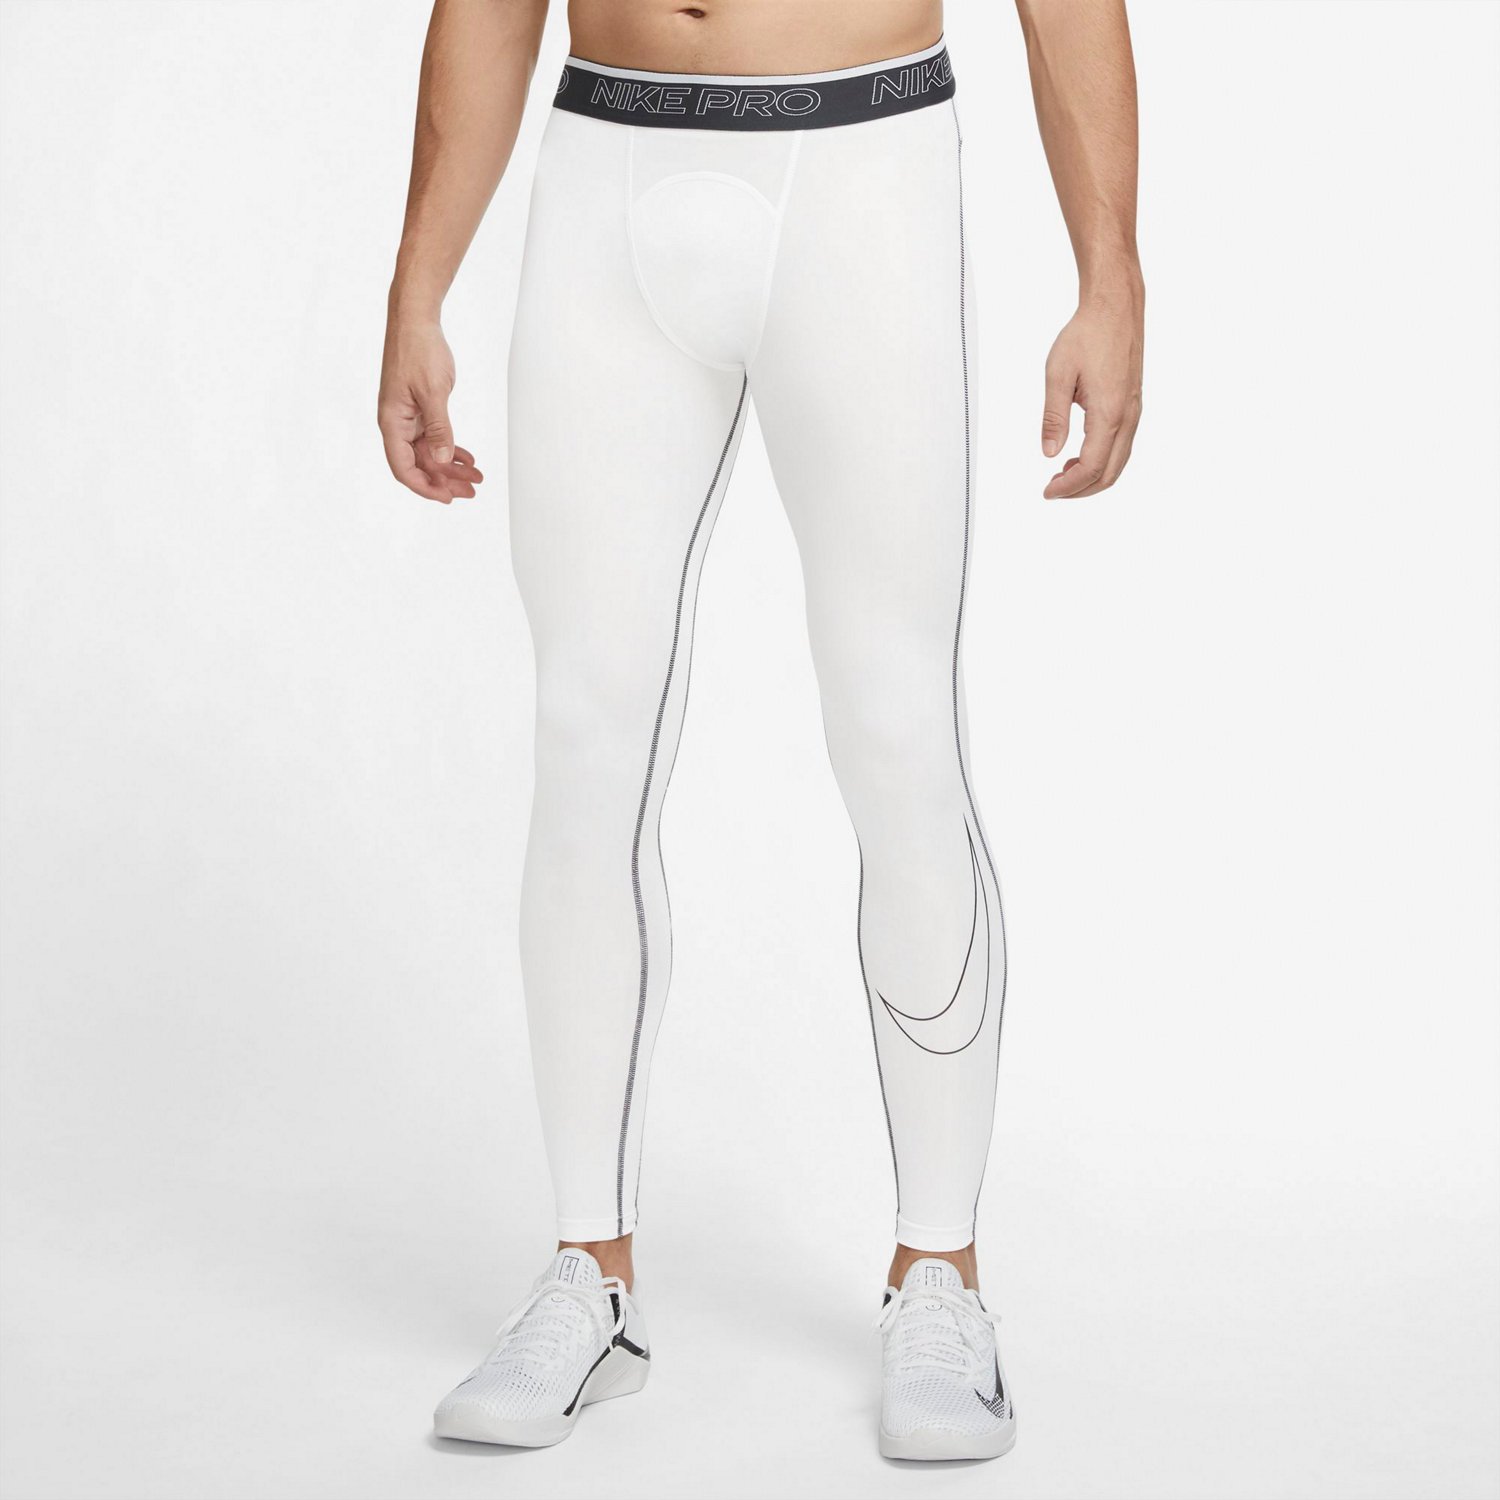 Nike M PRO Dri-Fit Tights | Free Shipping at Academy